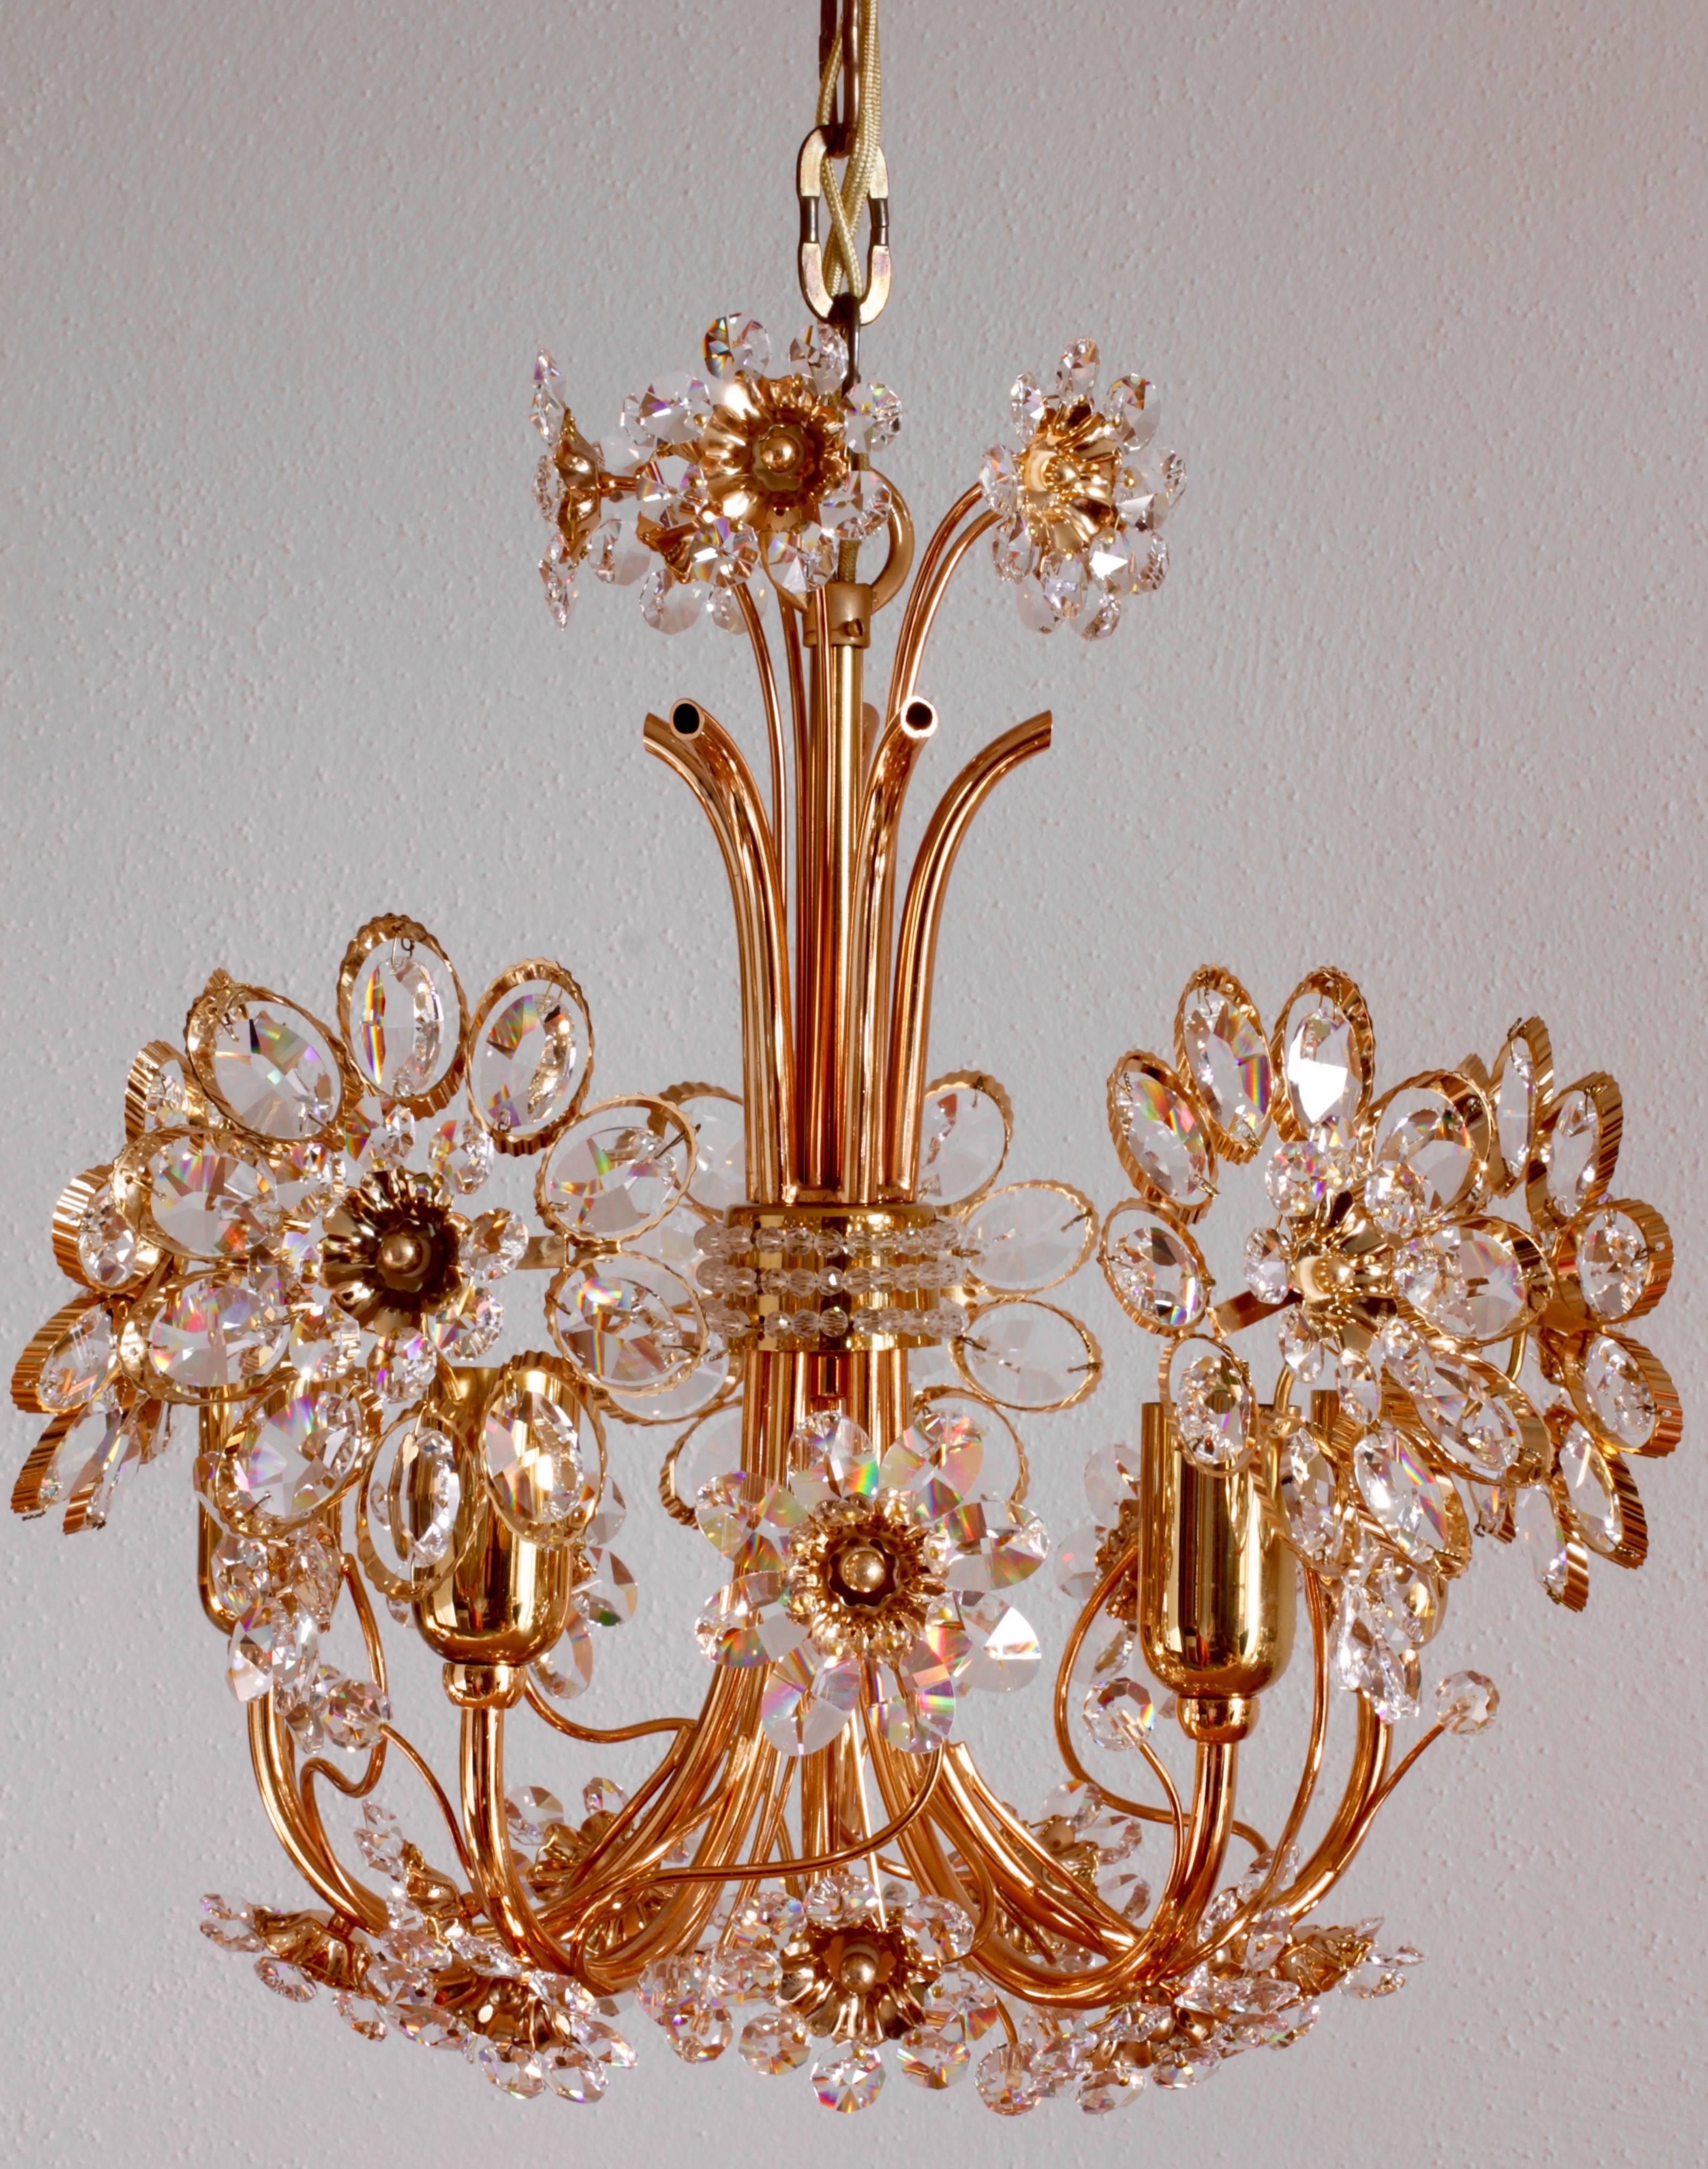 An absolutely stunning Mid-Century German gilt brass and cut crystal chandelier by Palwa, circa 1965-1975. Perfect for the Hollywood Regency style, there is no better combination than gold and crystal for the opulent, decadent and luxurious look of